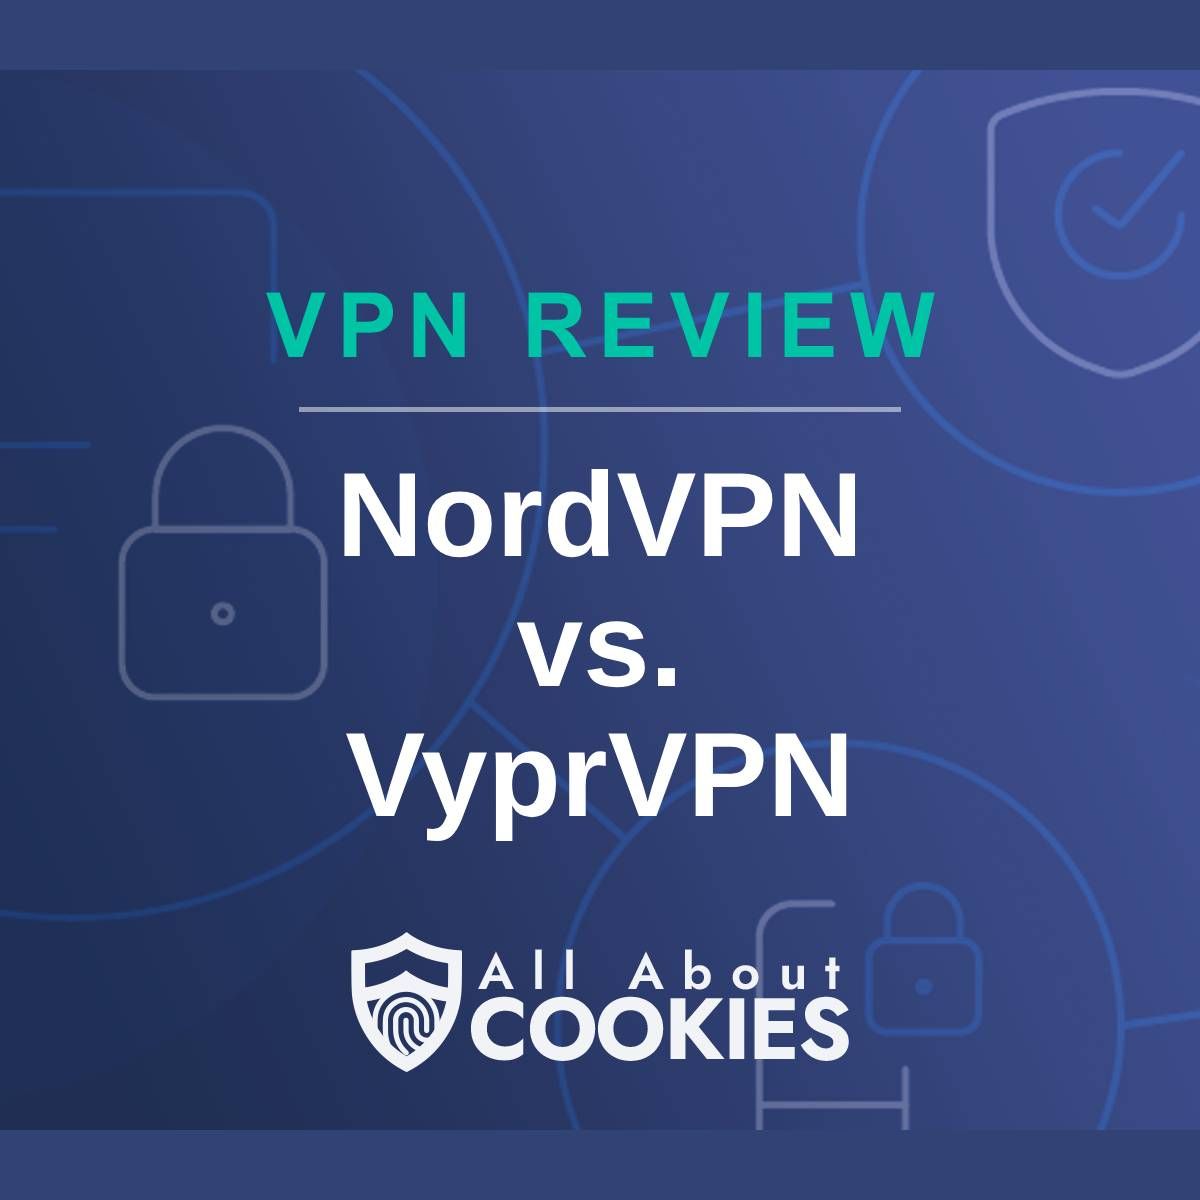 A blue background with images of locks and shields with the text &quot;VPN Review NordVPN vs. VyprVPN&quot; and the All About Cookies logo. 